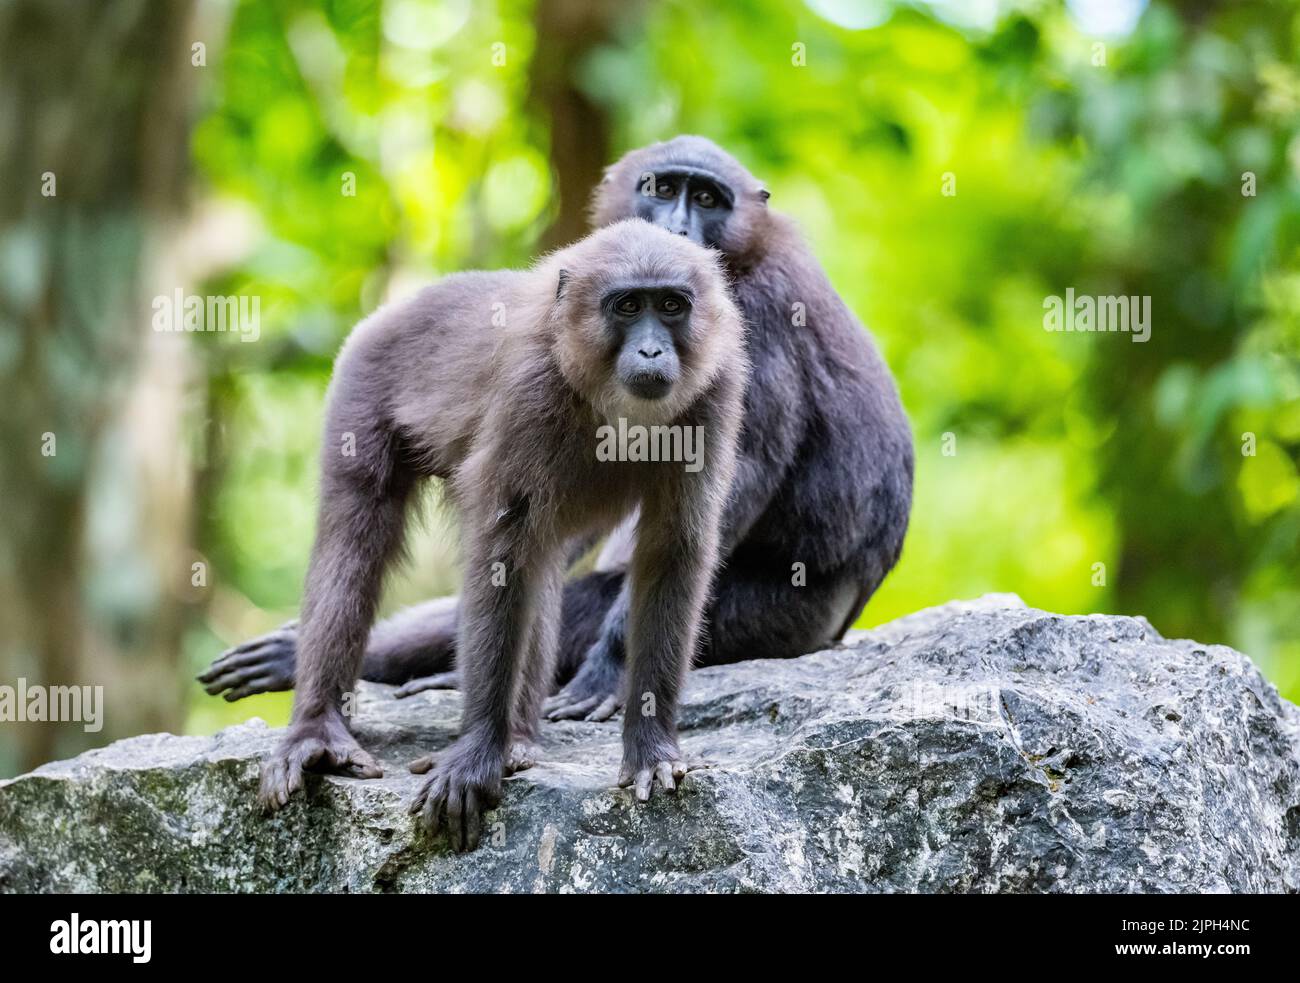 A pair endemic and endangered Moor Macaques (Macaca maura) in the wild. Bantimurung Bulusaraung National Park, Sulawesi, Indonesia. Stock Photo